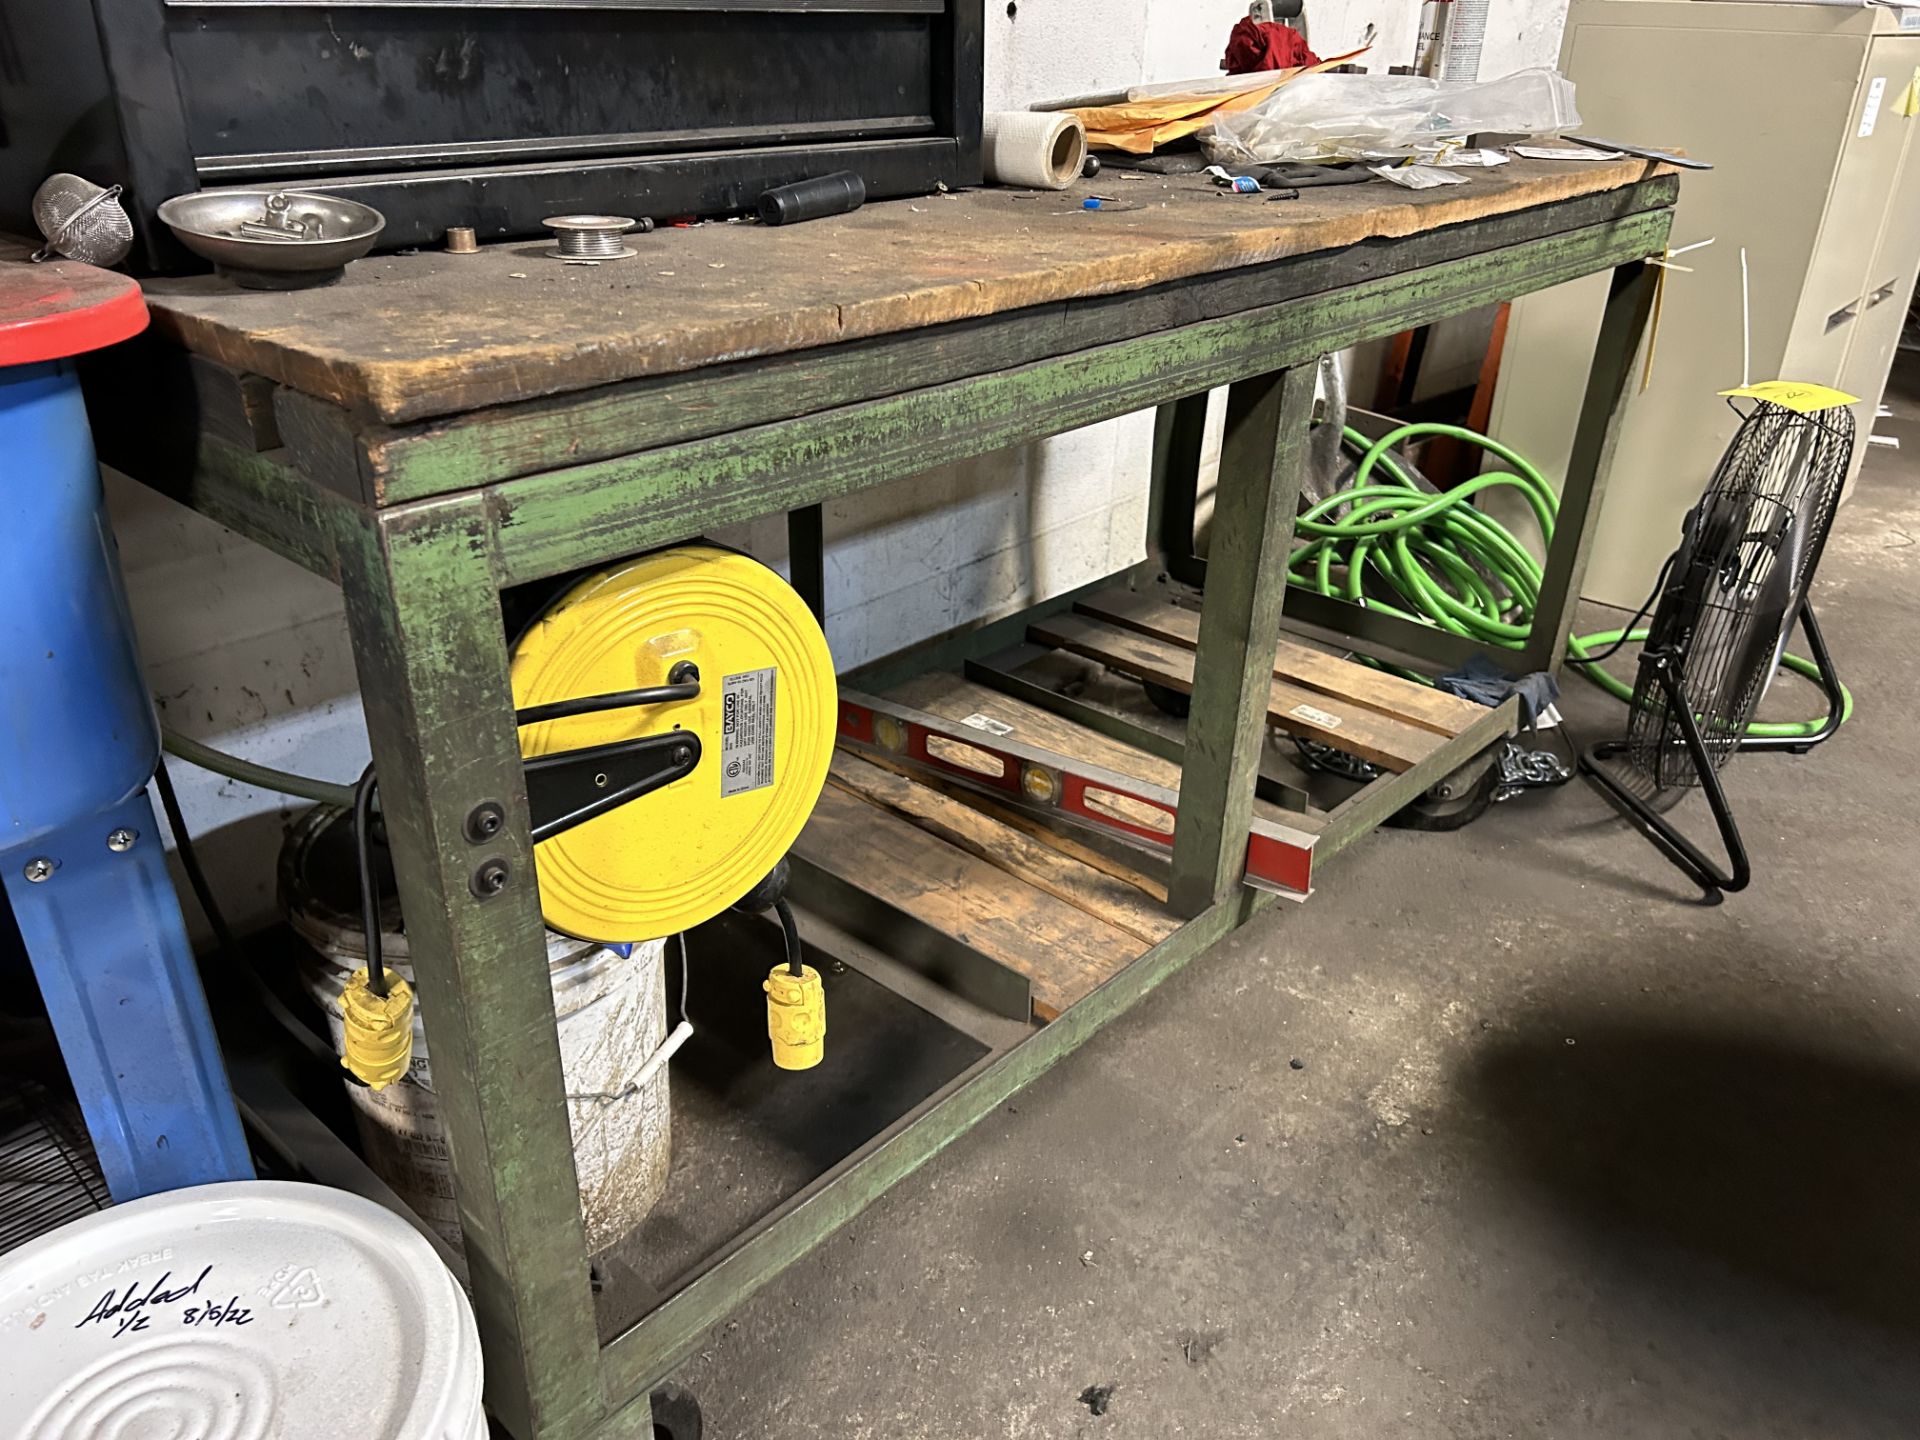 Shop Table, Includes Bayco Reel, (No Contents), Rigging/Loading Fee: $25 - Image 2 of 3